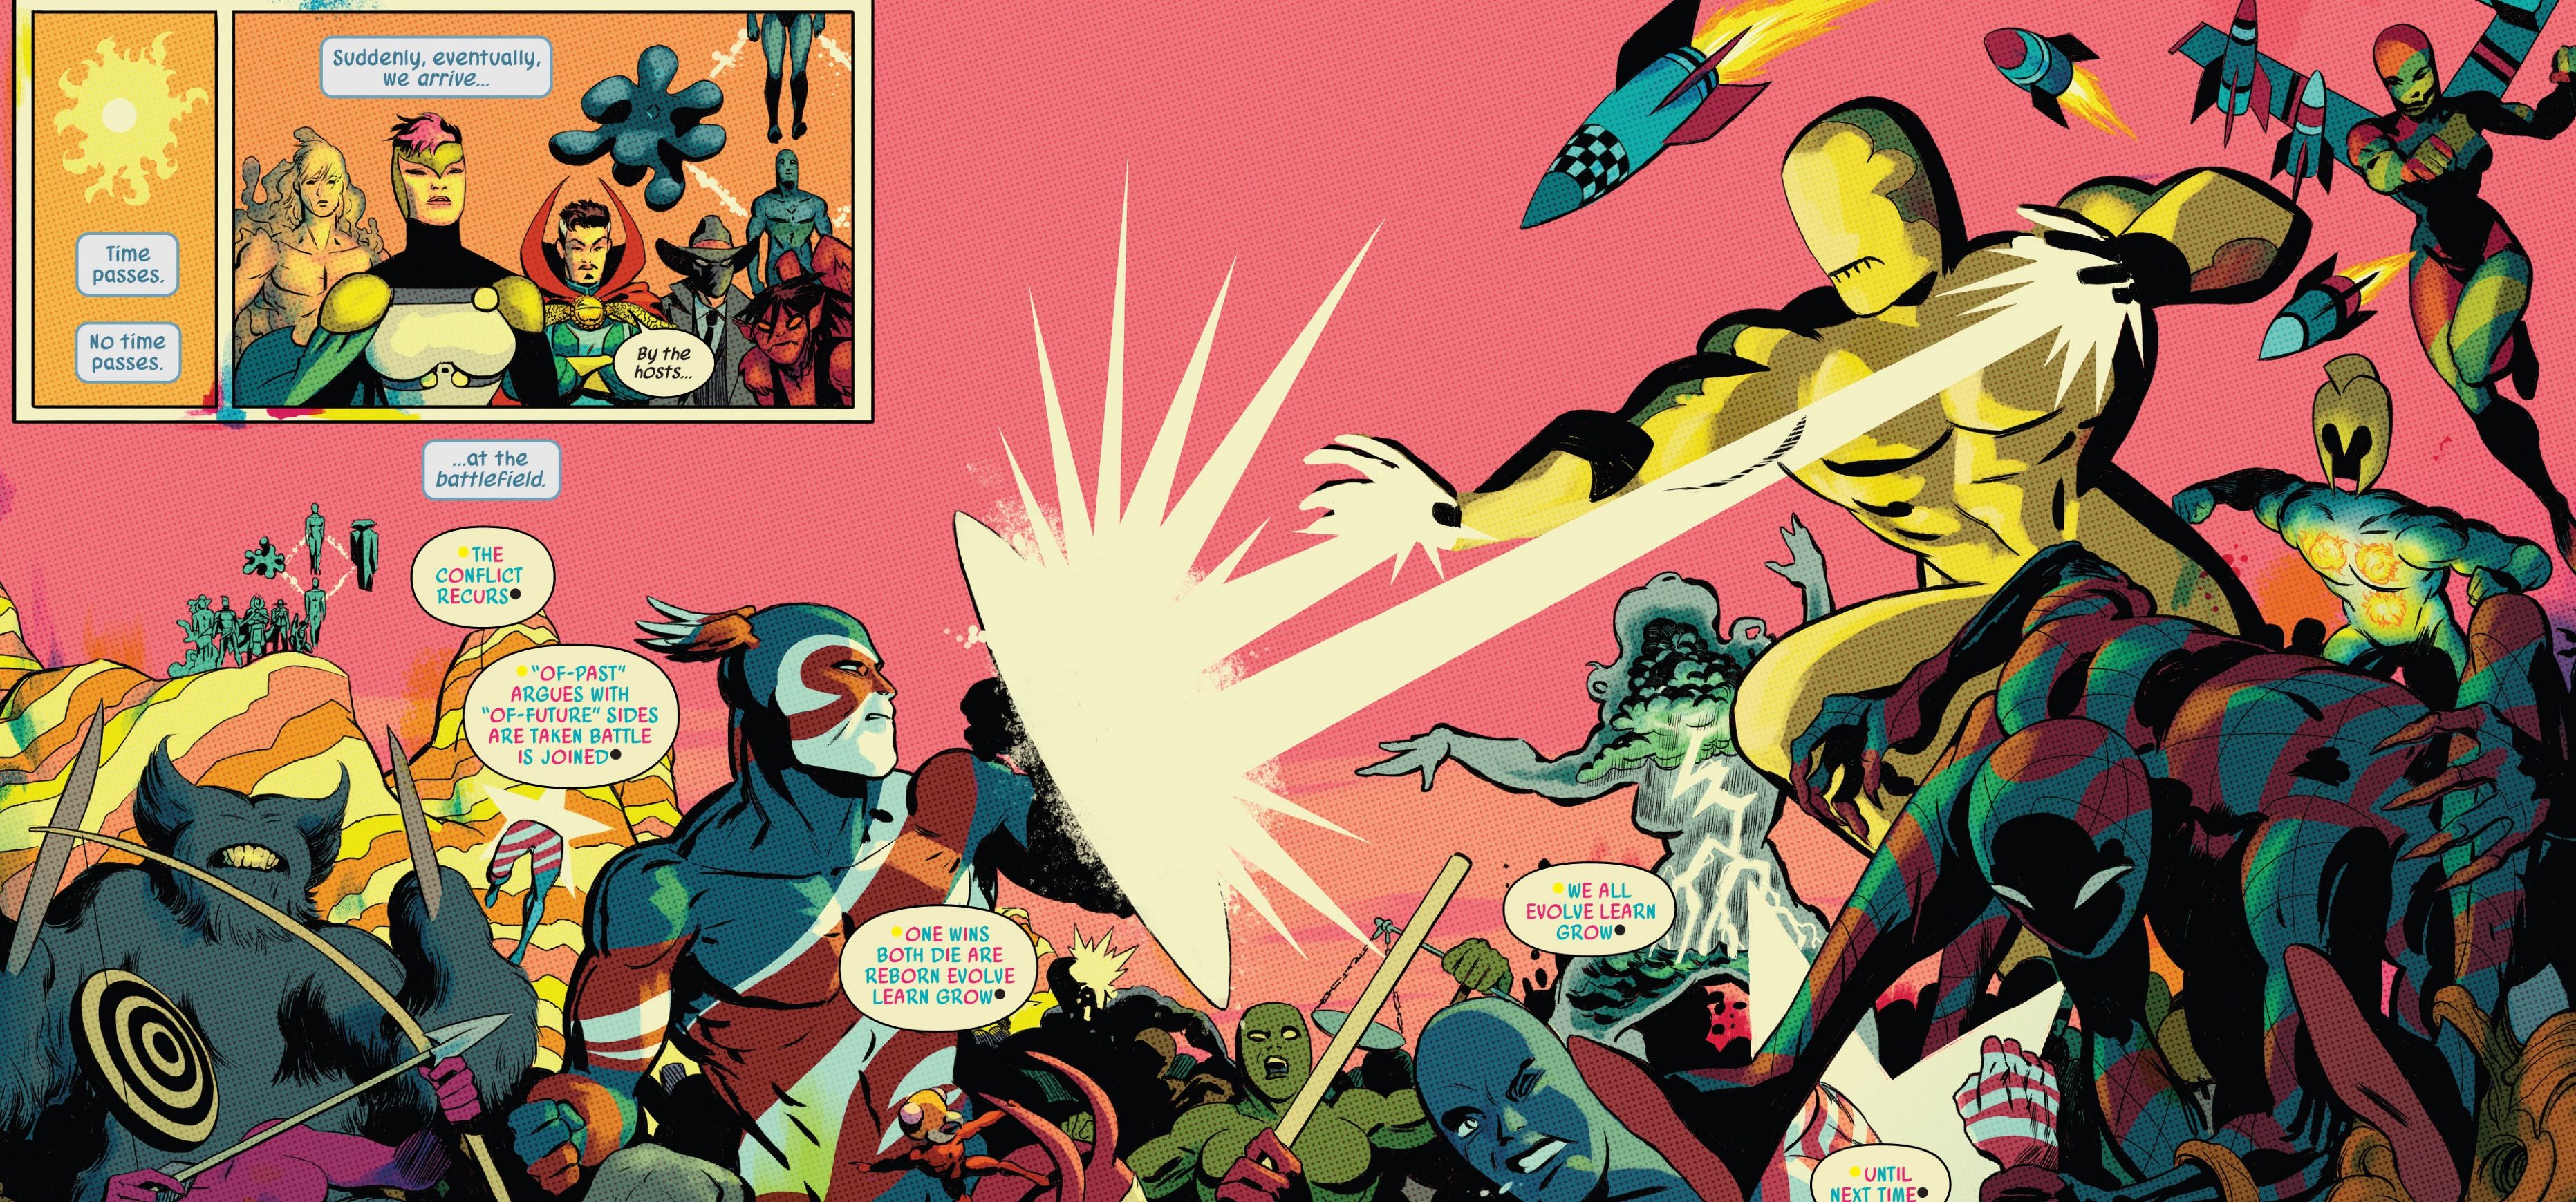 Defenders 4 image, showing archetypes of Captain America and Iron Man in combat